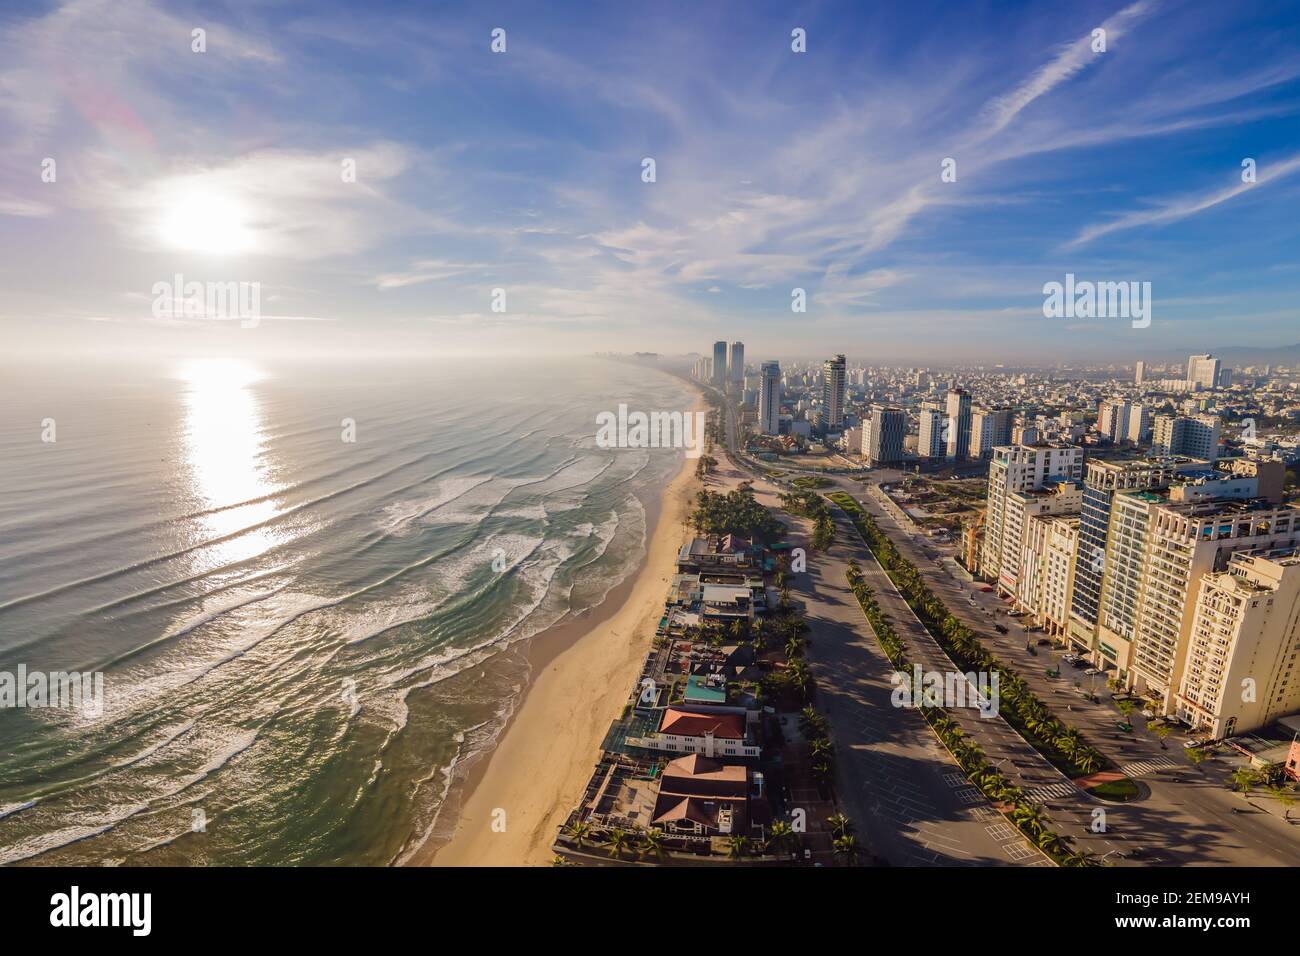 Beautiful My Khe beach from drone Da Nang, street and buildings the Central beach and the sea. Photo from a drone Stock Photo - Alamy